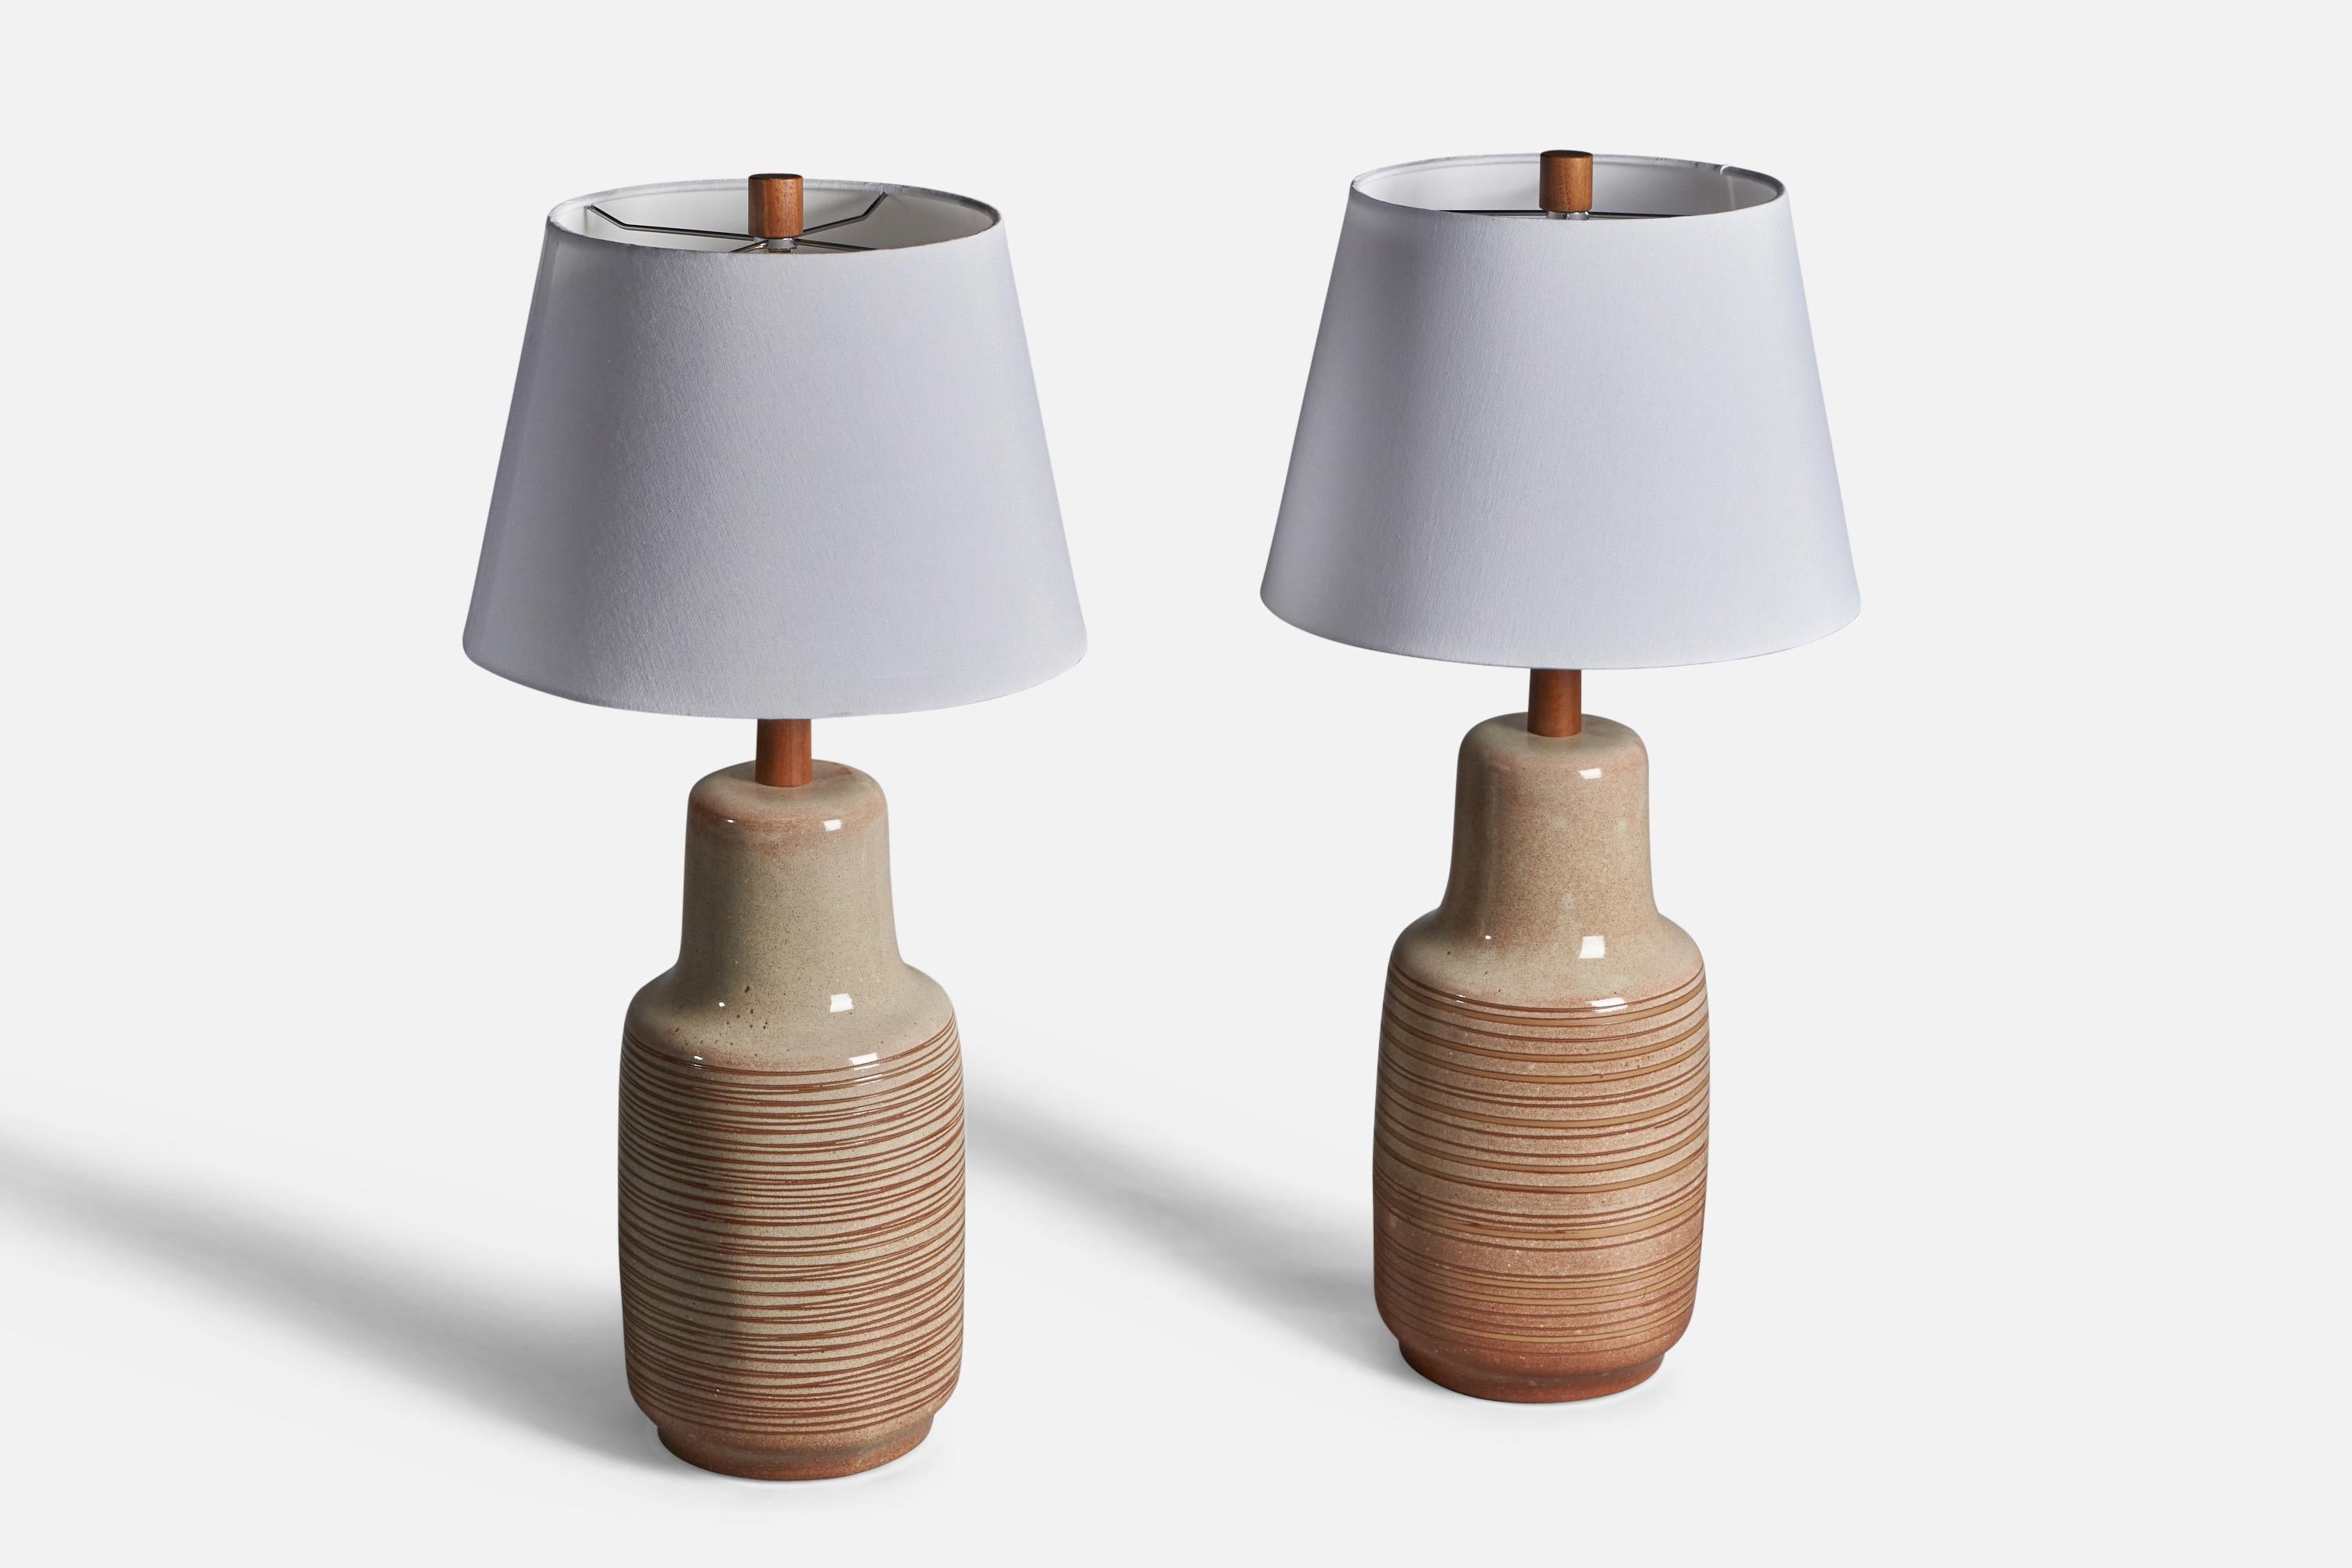 A pair of large brown-glazed and handpainted ceramic and walnut table lamps, designed by Jane & Gordon Martz and produced by Marshall Studios, USA, 1960s.

span data-mce-fragment=